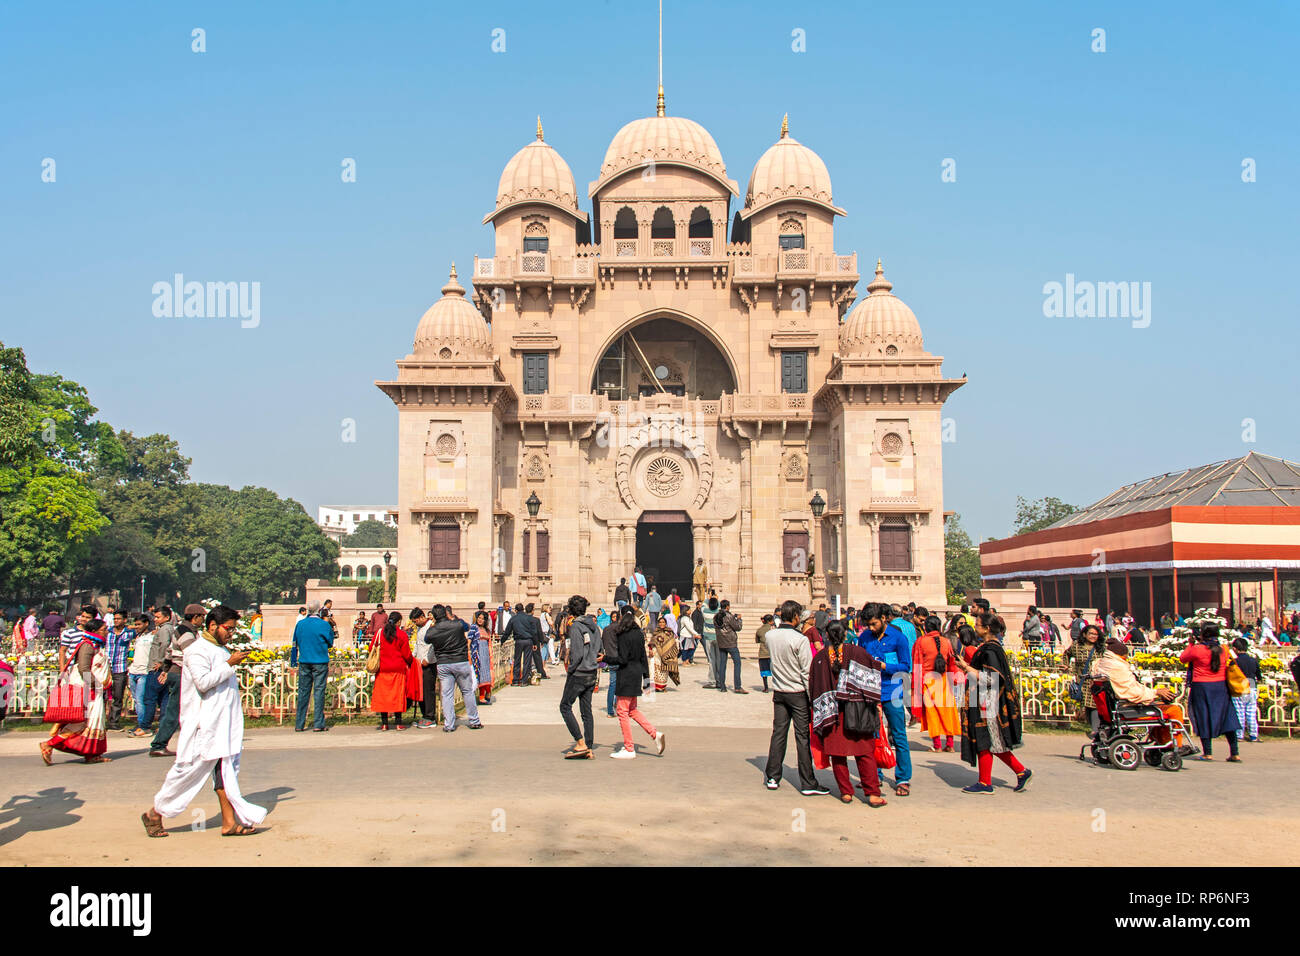 The Belur Math church in Kolkata with tourists and local people ...